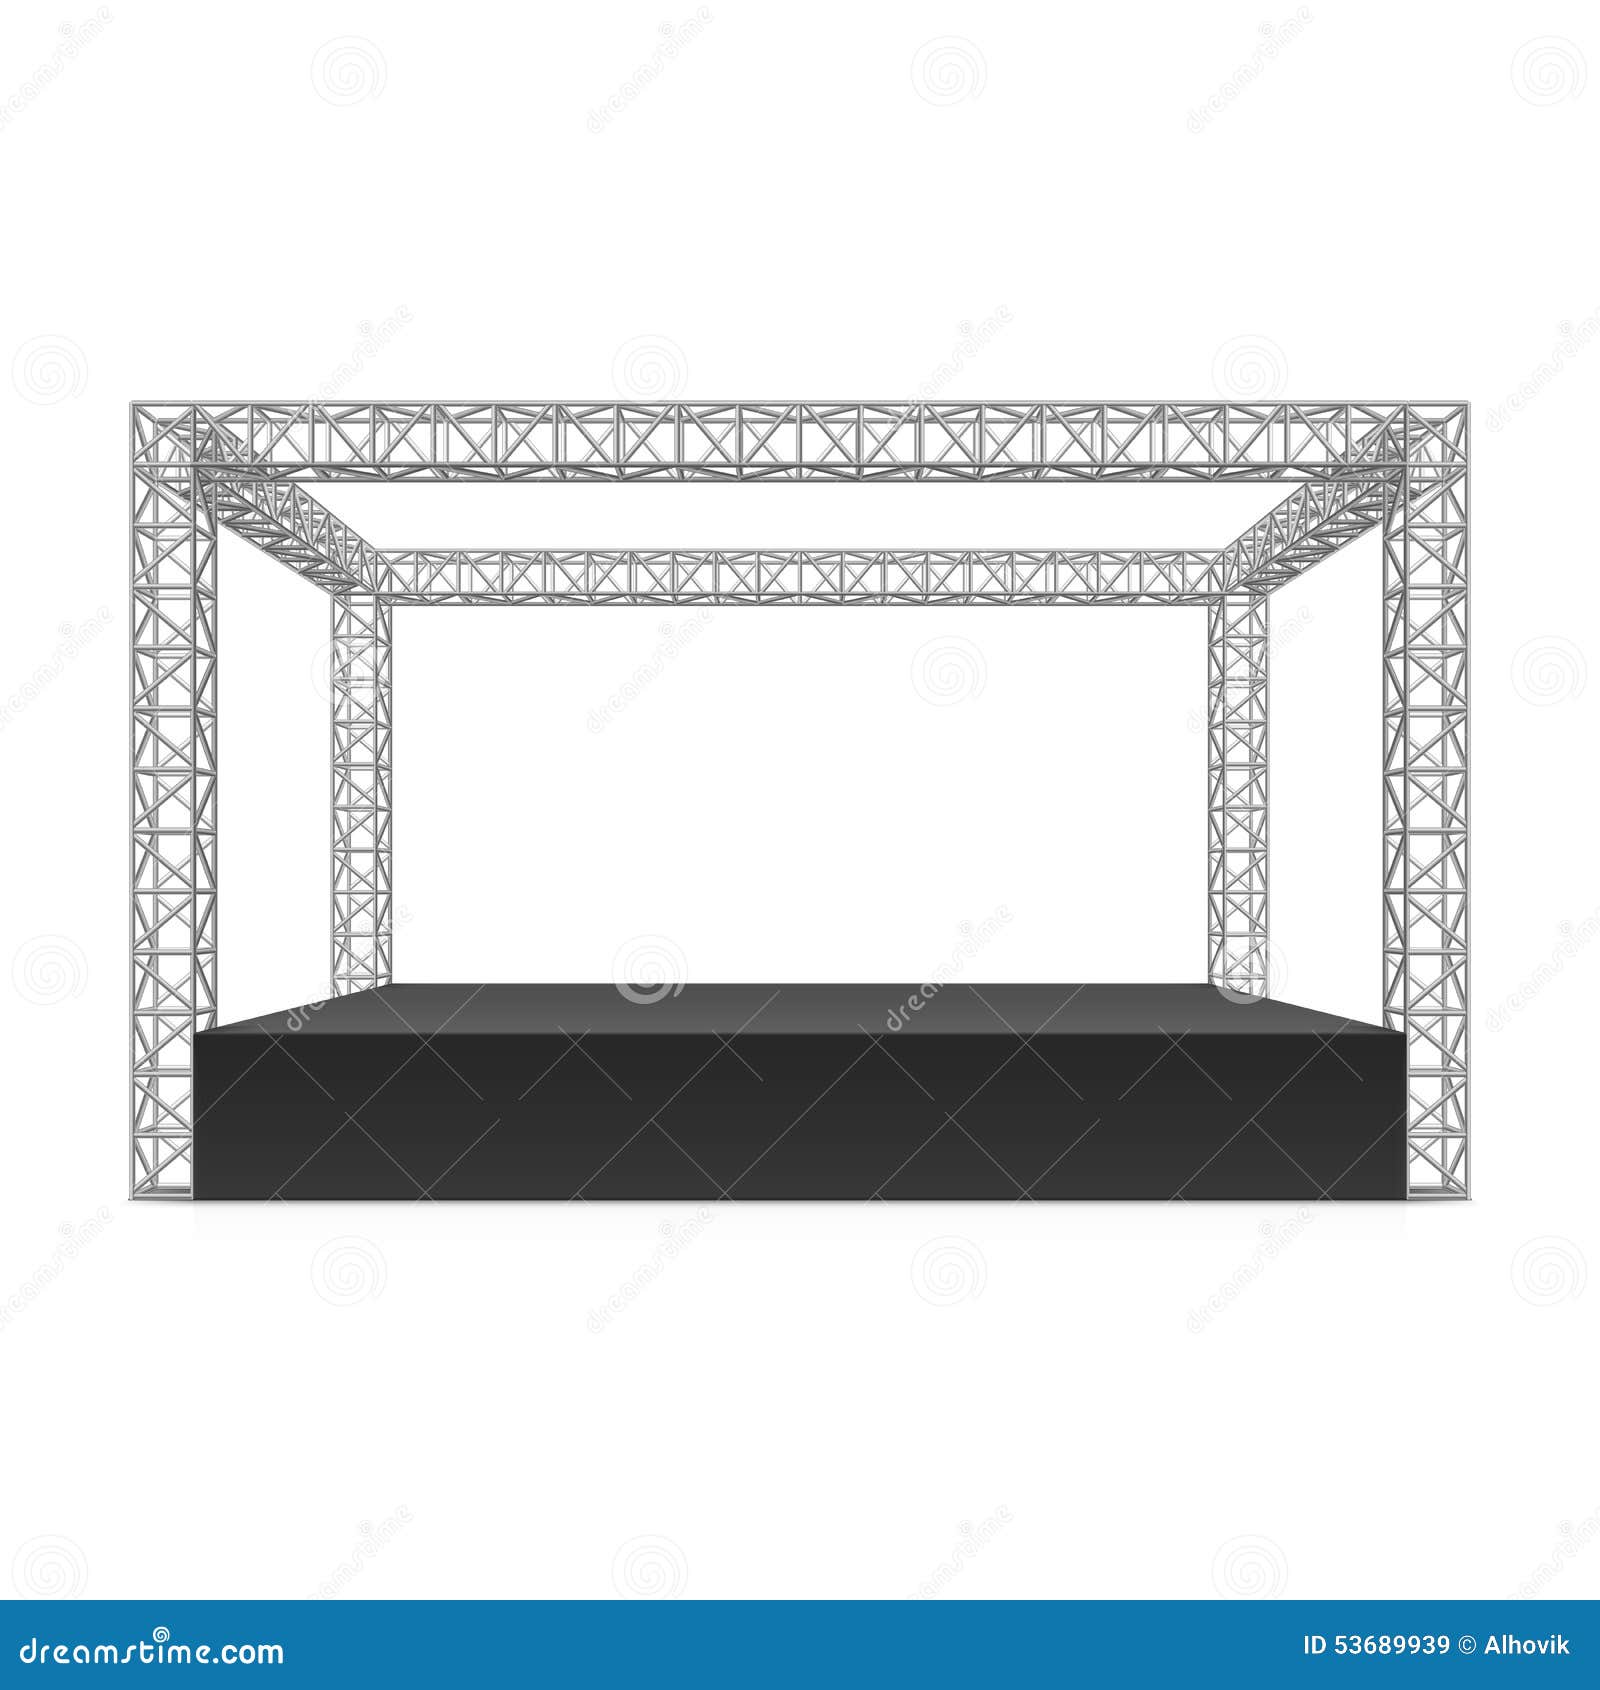 outdoor festival stage